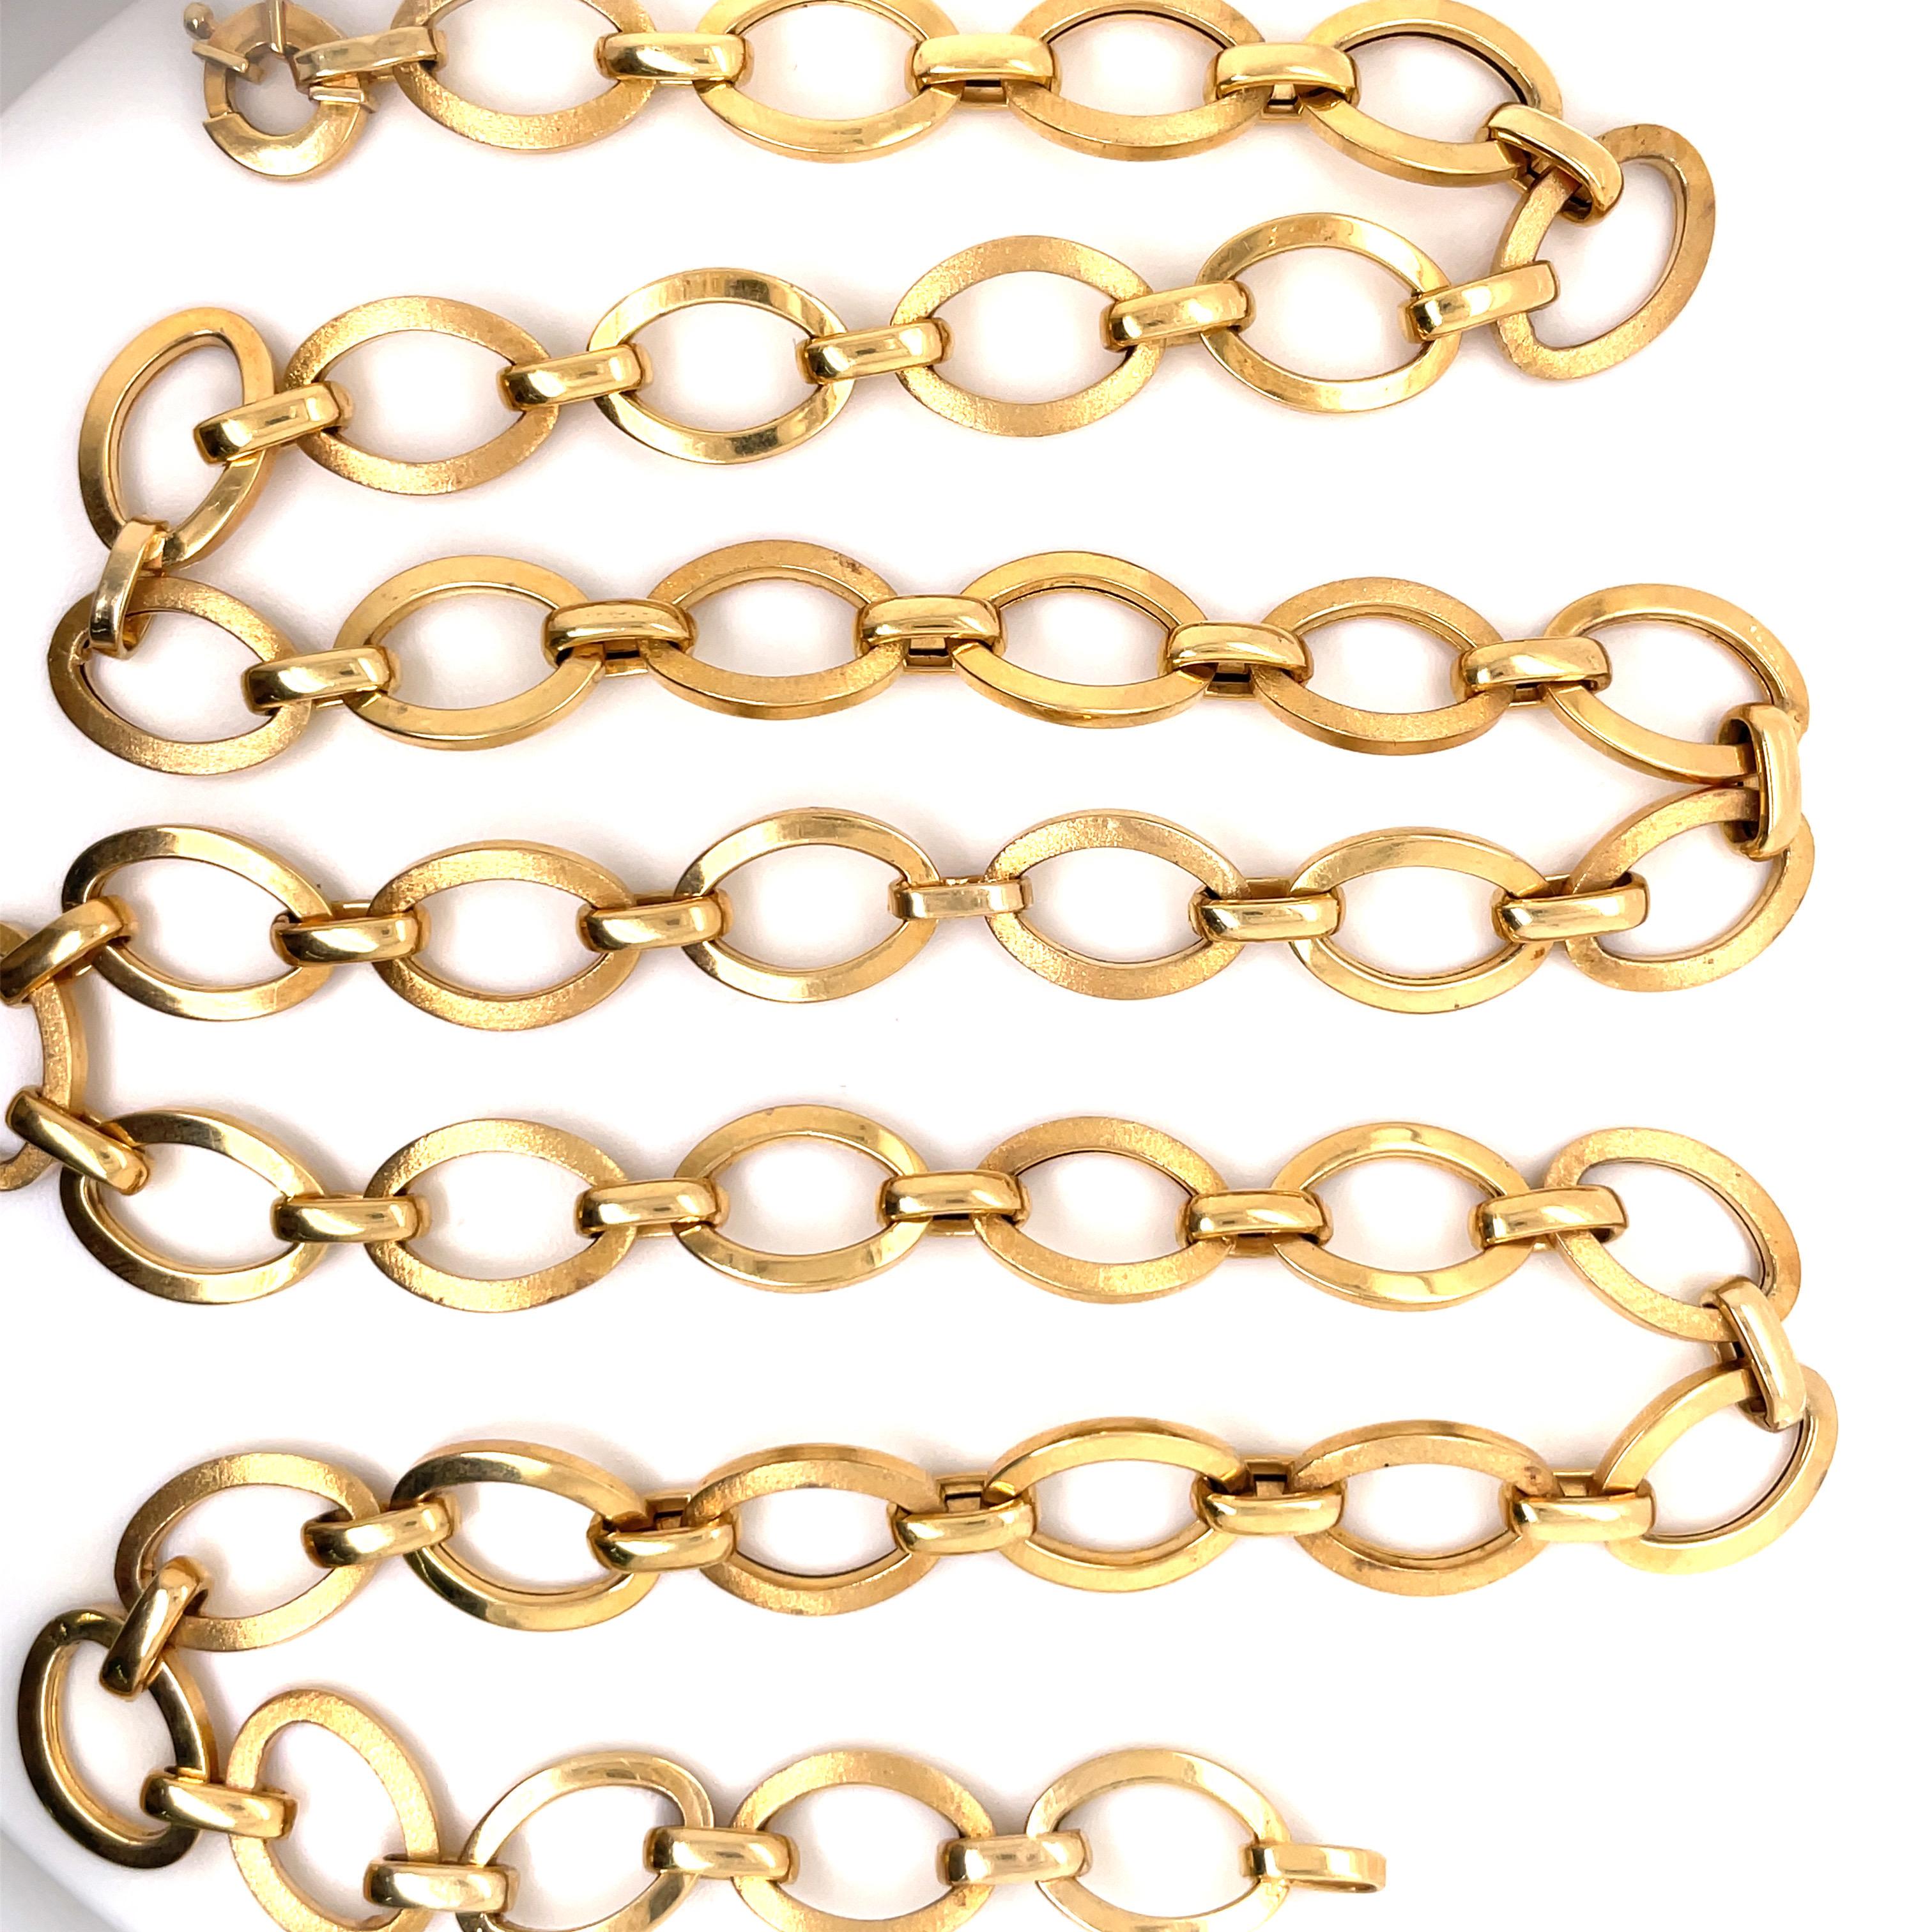 14 Karat Yellow Gold link necklace featuring alternate oval satin & polish links weighing 34.2 grams, 30.5 inches.
 Ovals measure 0.63 *0.45 inches
Made in Italy